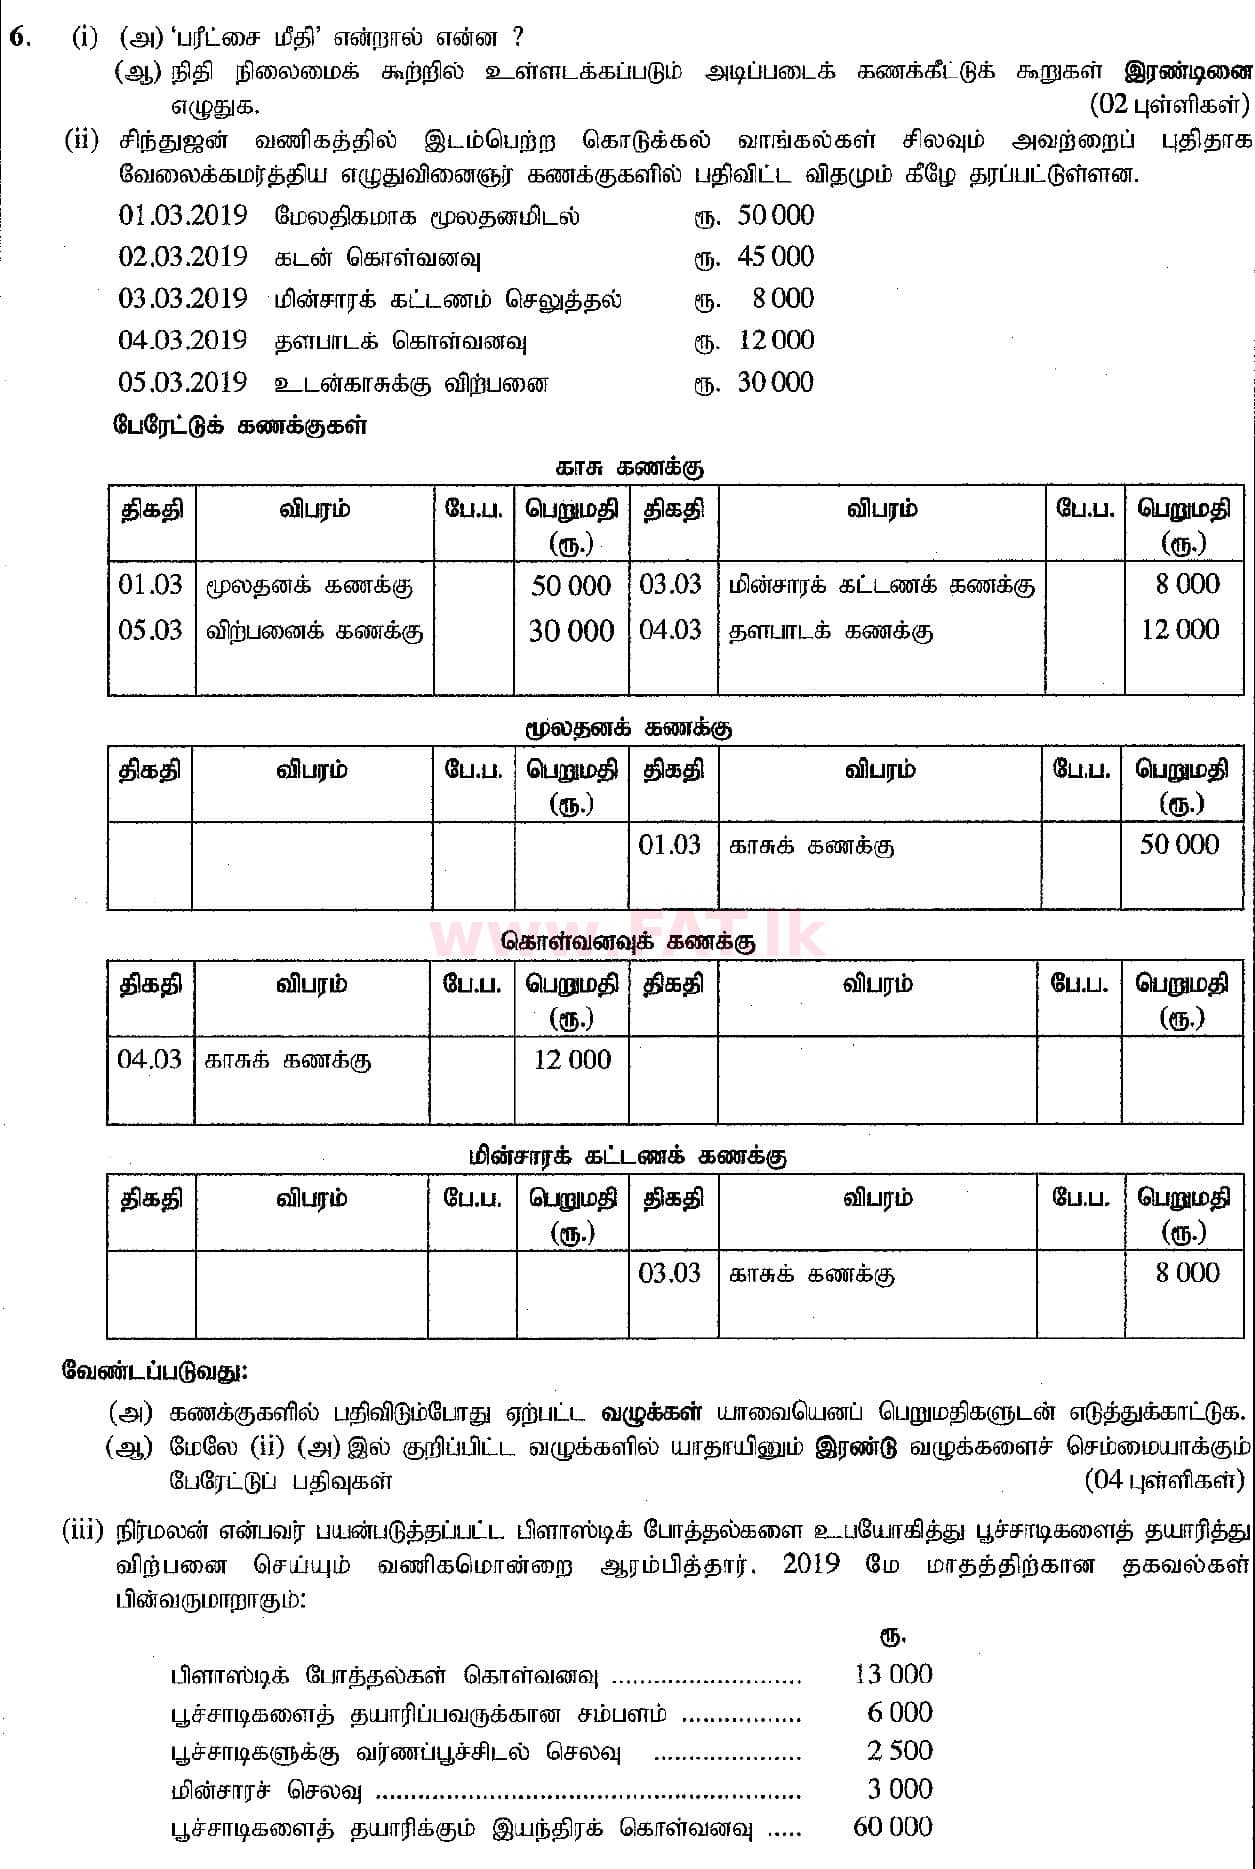 National Syllabus : Ordinary Level (O/L) Business and Accounting Studies - 2019 March - Paper II (தமிழ் Medium) 6 1